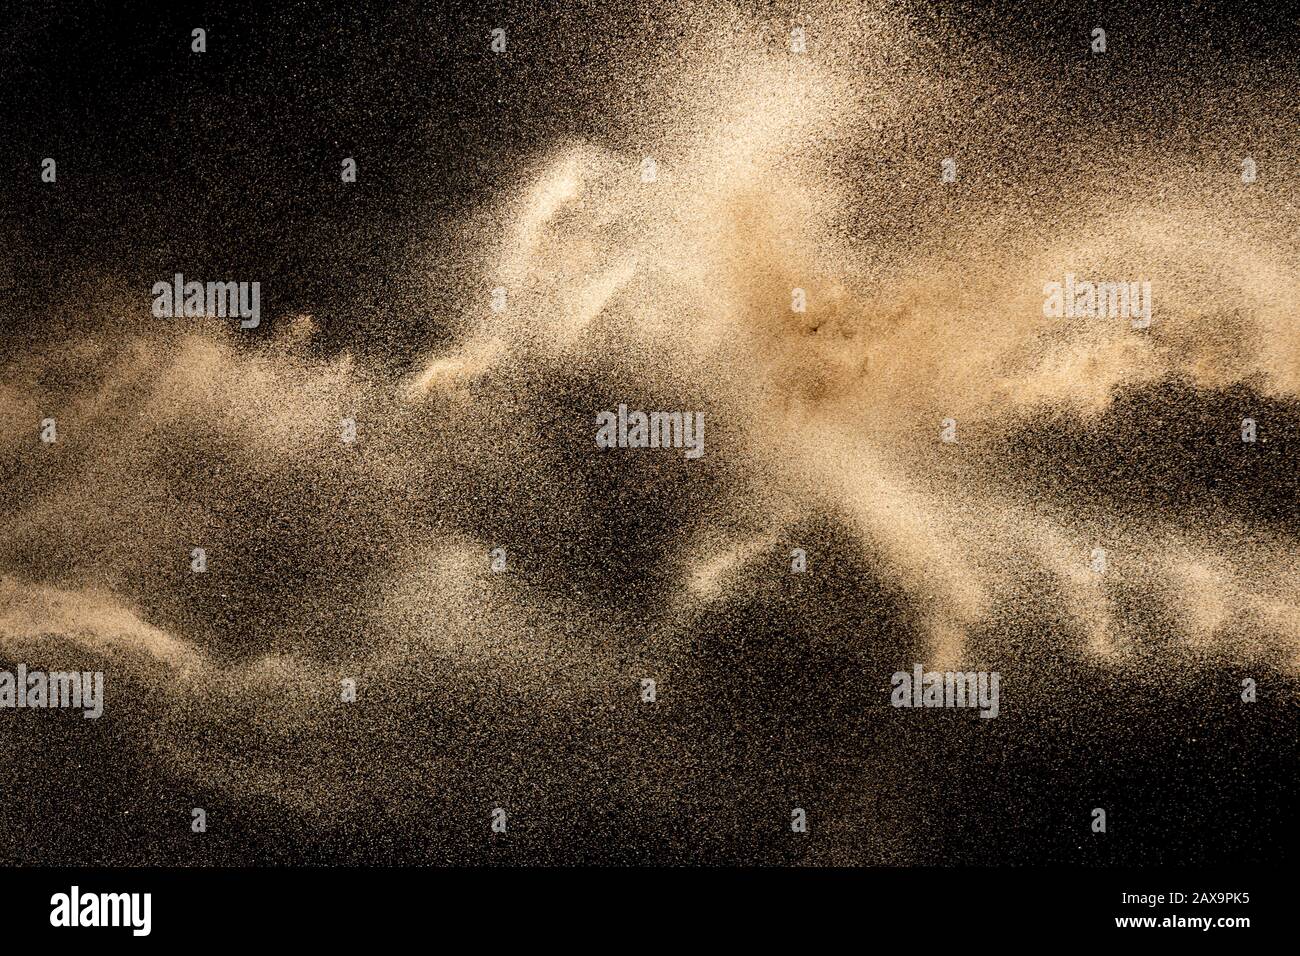 Brown colored sand splash.Dry river sand explosion isolated on black background. Abstract sand cloud. Stock Photo